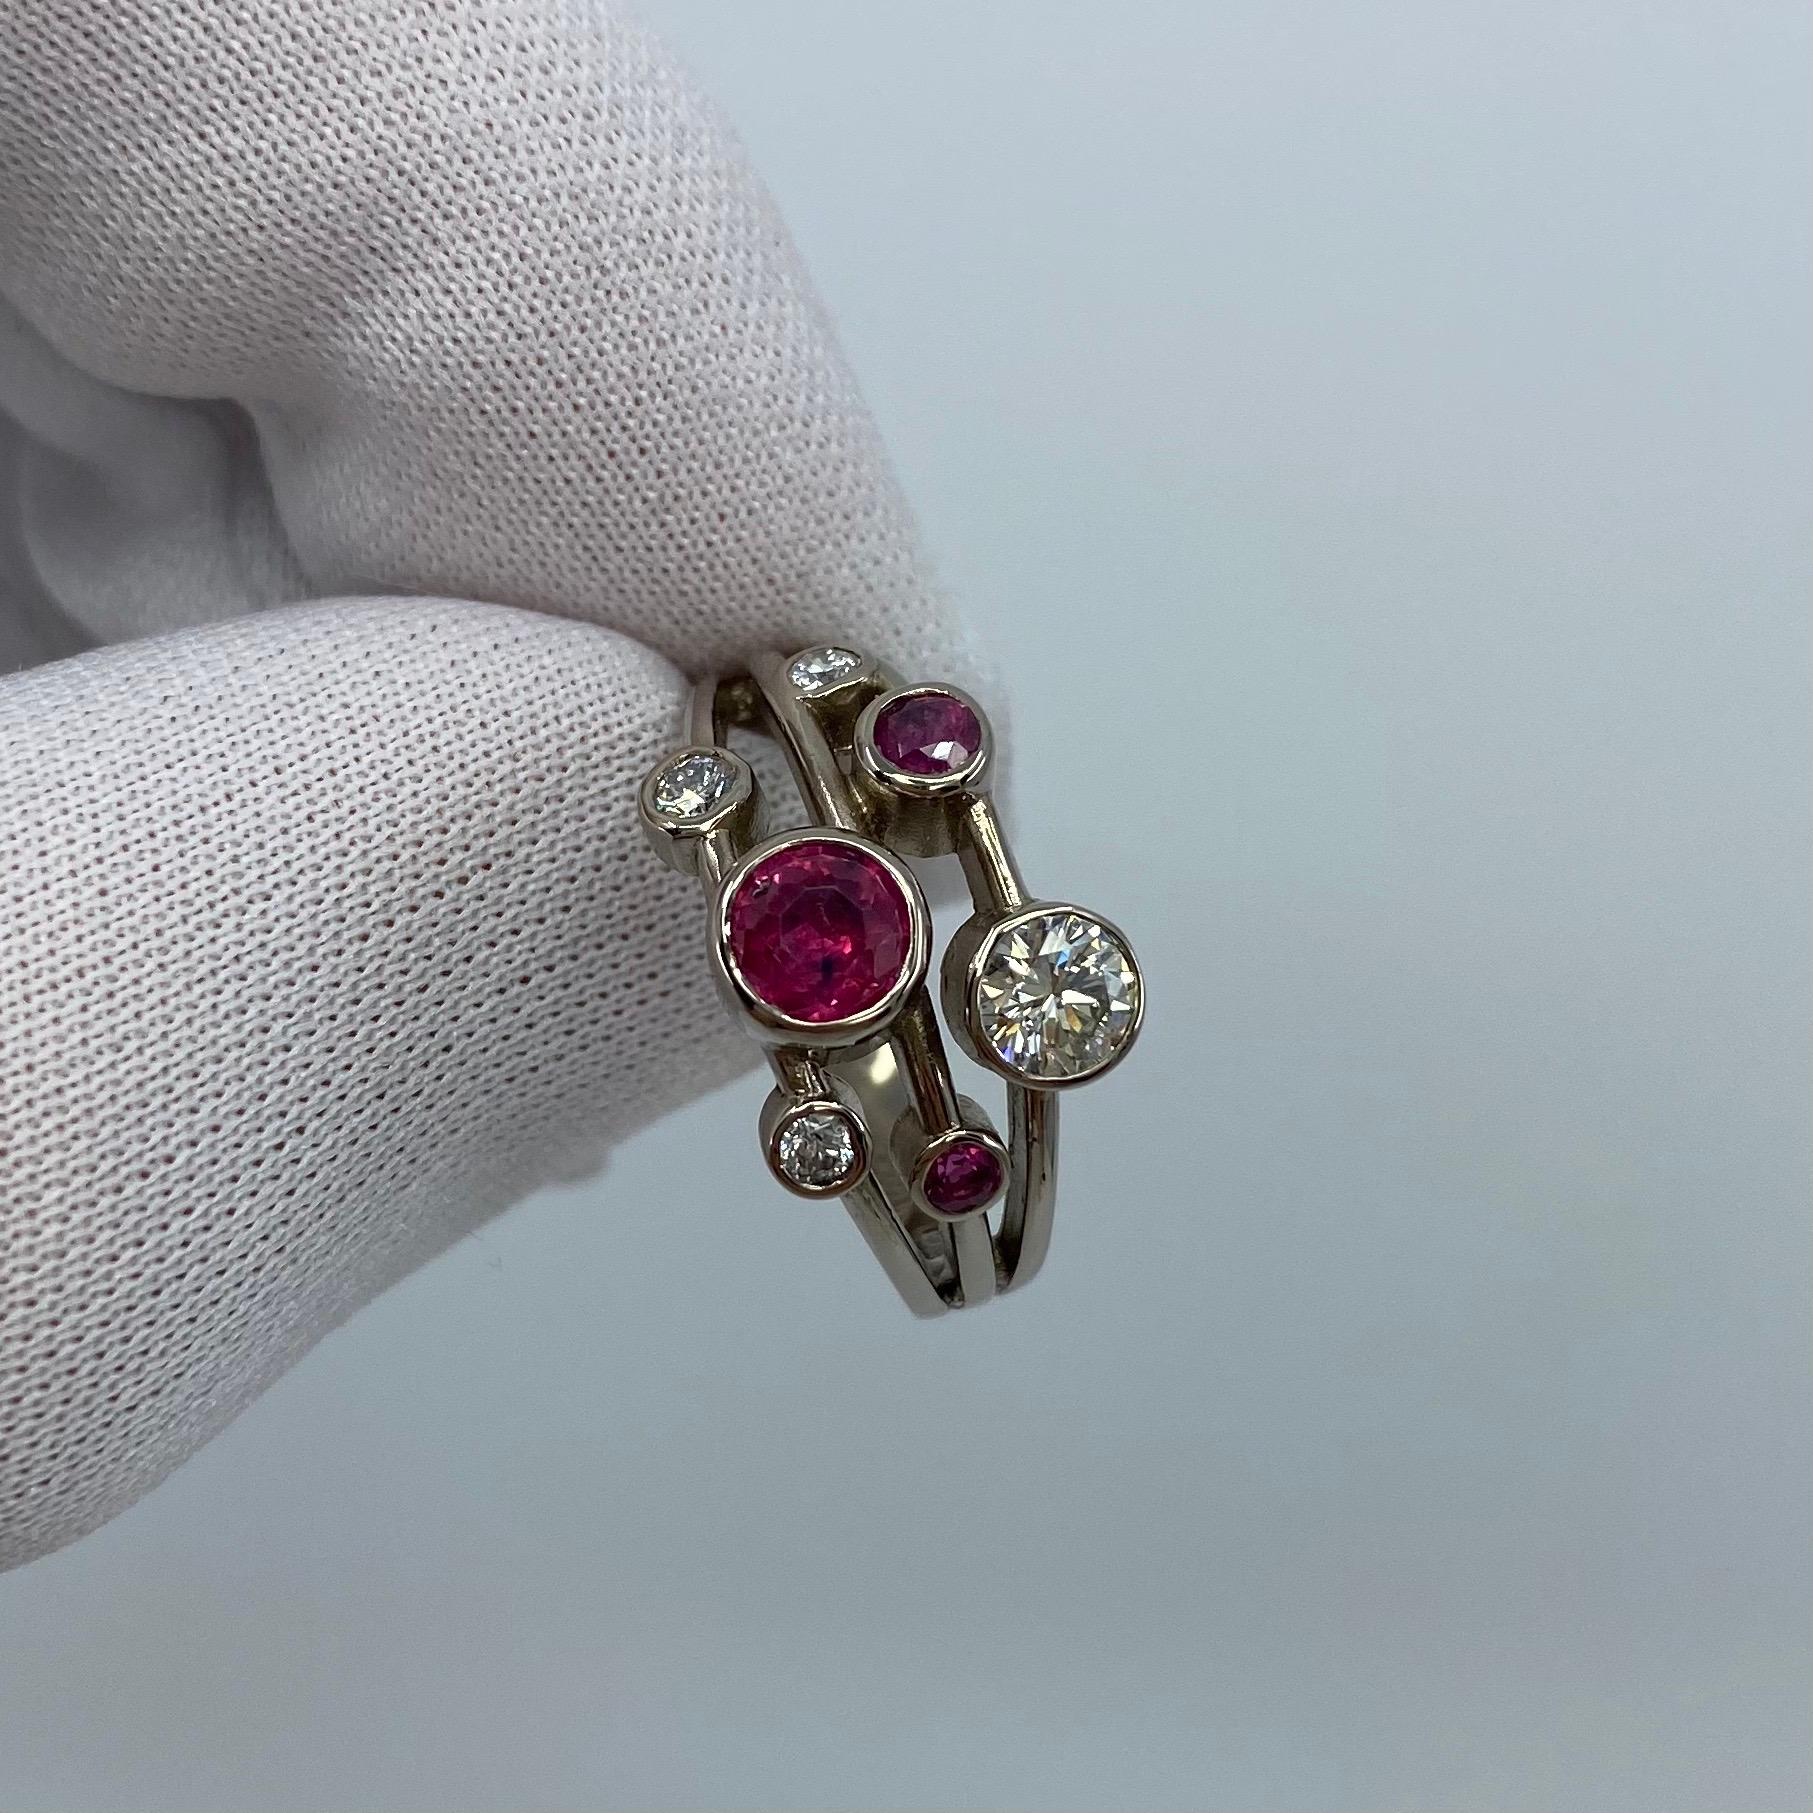 1.27 Total Carat Diamond & Ruby Raindance-Style 18k White Gold Ring.

A beautiful 18k white gold ring set with 4 round brilliant cut white diamonds and 3 round cut natural red rubies.
The largest diamond is a GIA Certified 0.30ct with VS2 clarity